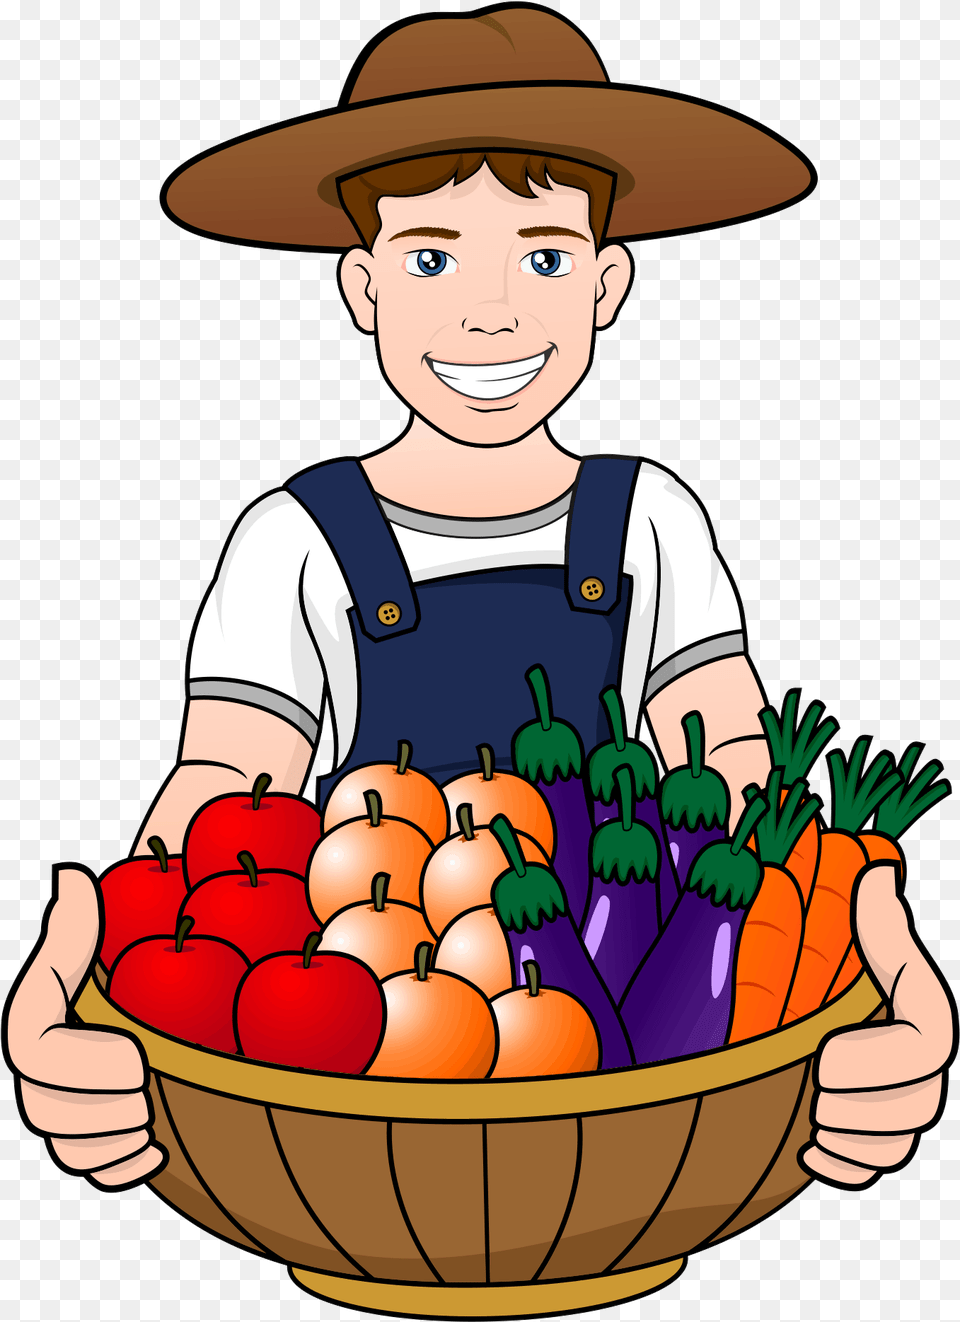 A Men Have Fruits And Vegetables In The Basket Basket Fruits And Vegetables Clipart, Clothing, Hat, Person, Face Png